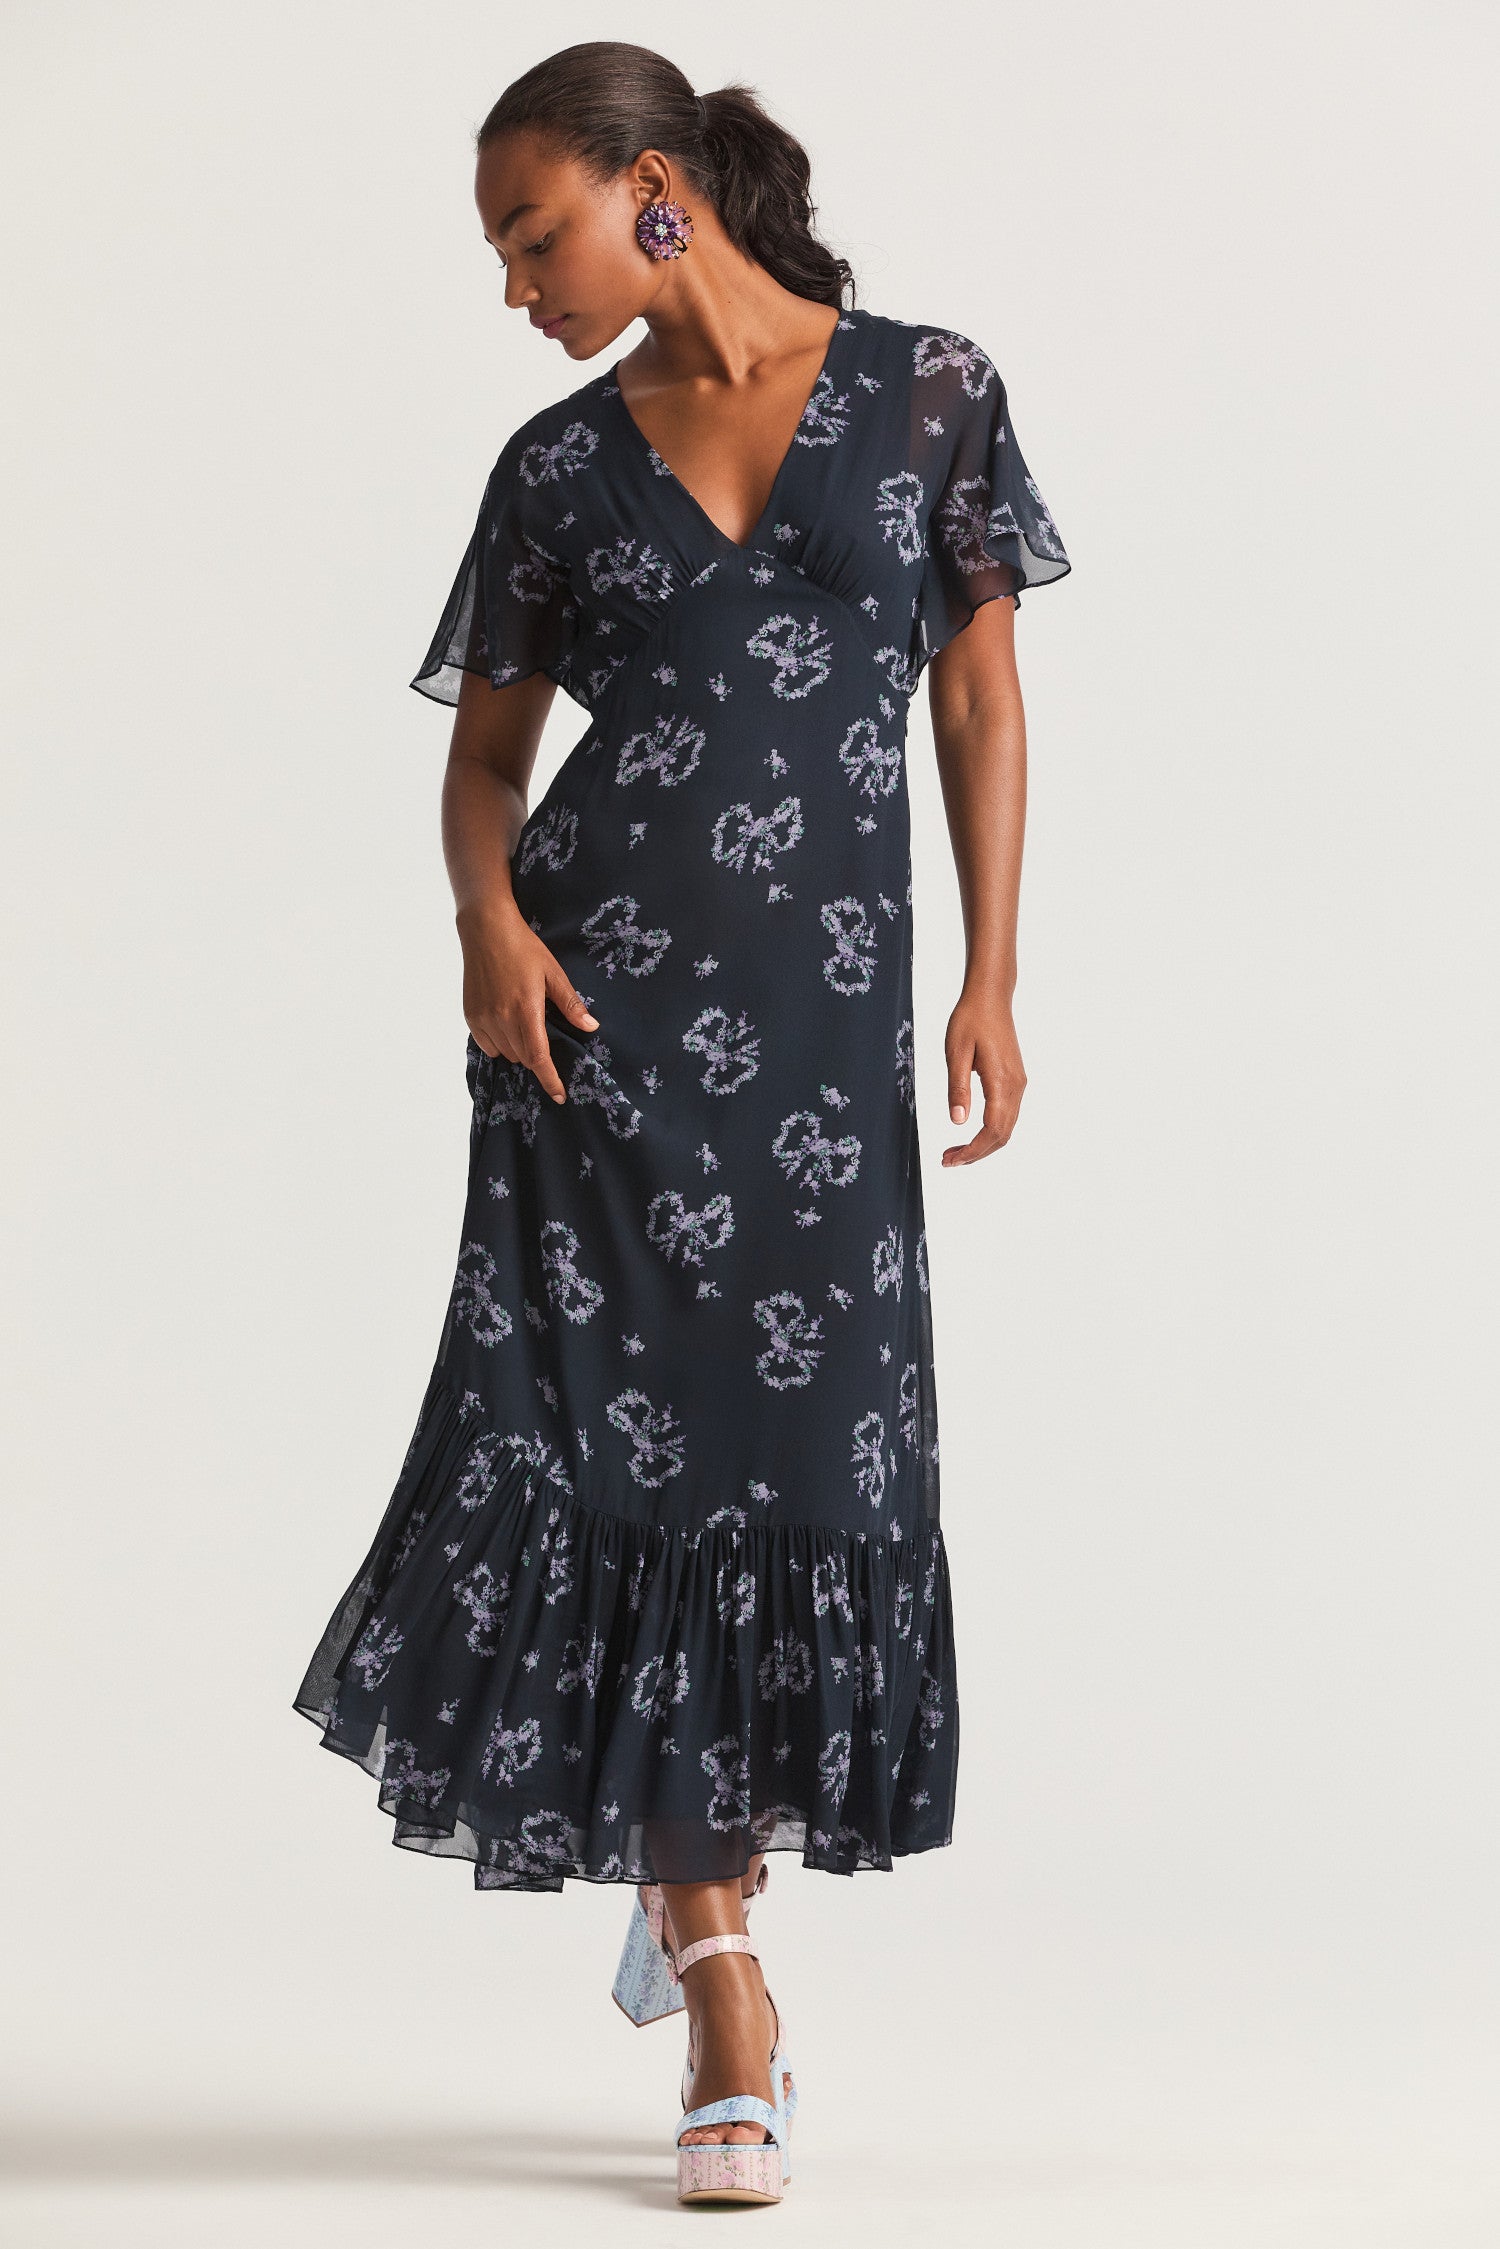 Dark blue slip midi dress, with elegant bow print on a viscose fabric. A deep v neckline with light flutter sleeves falls to a shaped waist seam that flows to a flounce skirt. 